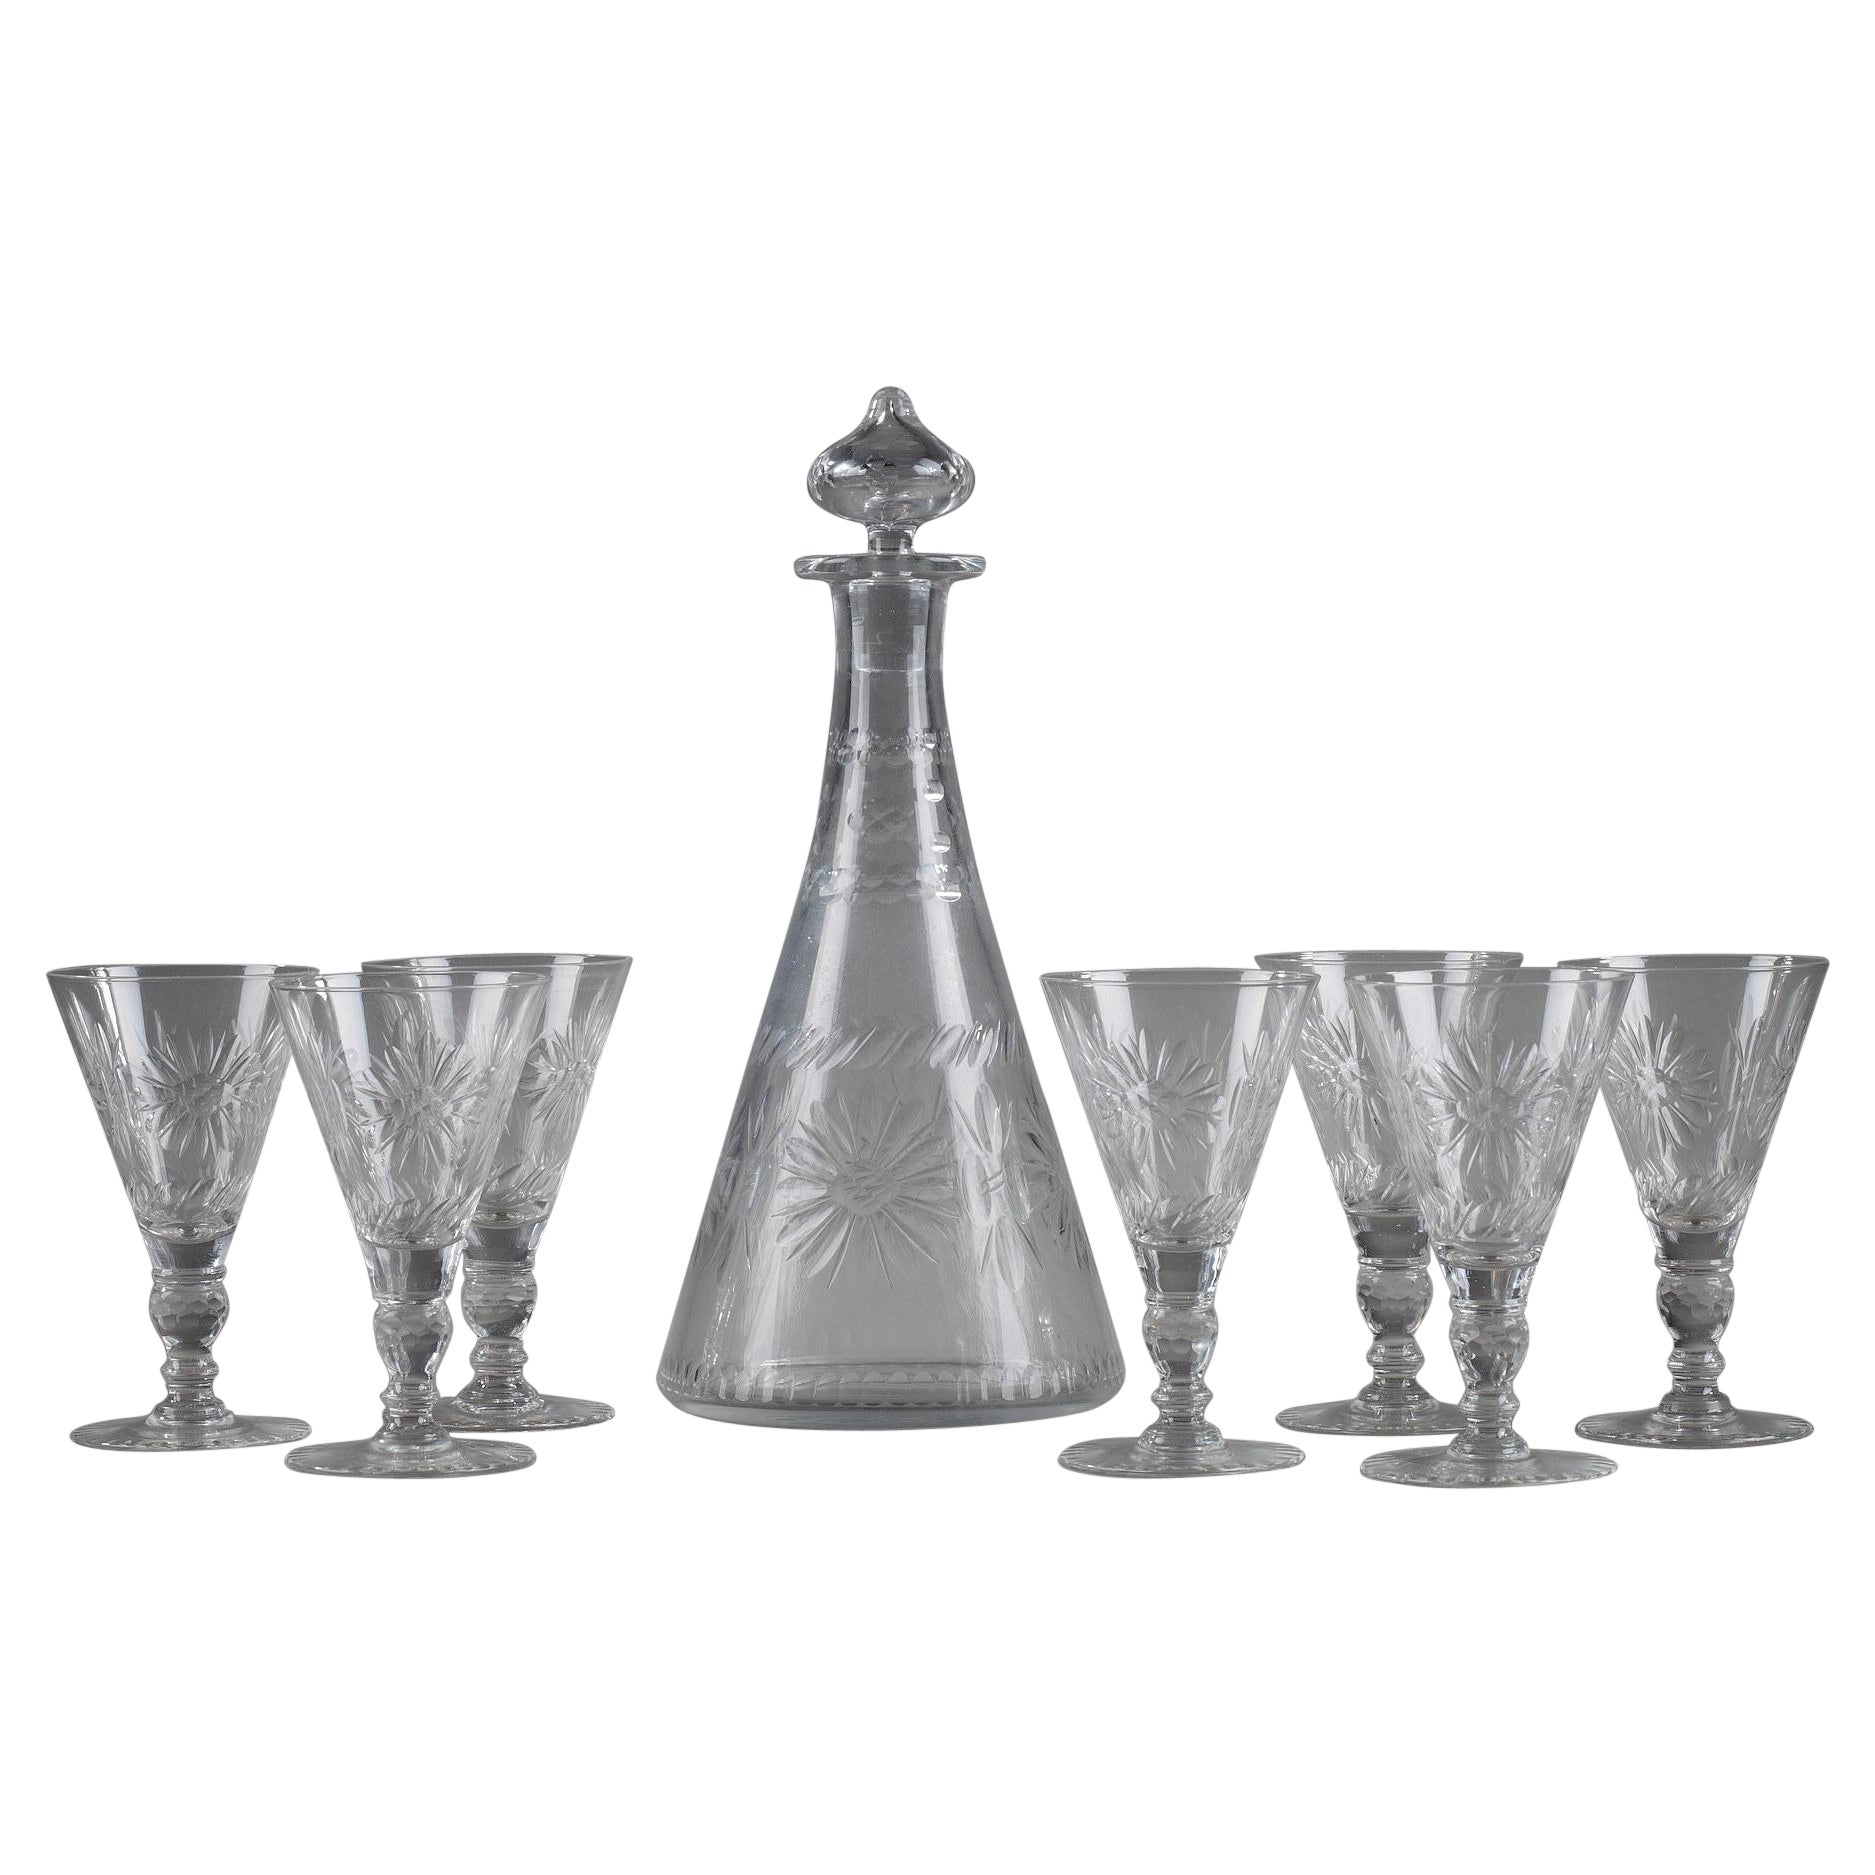 Set of 7 Crystal Glasses and a Pitcher